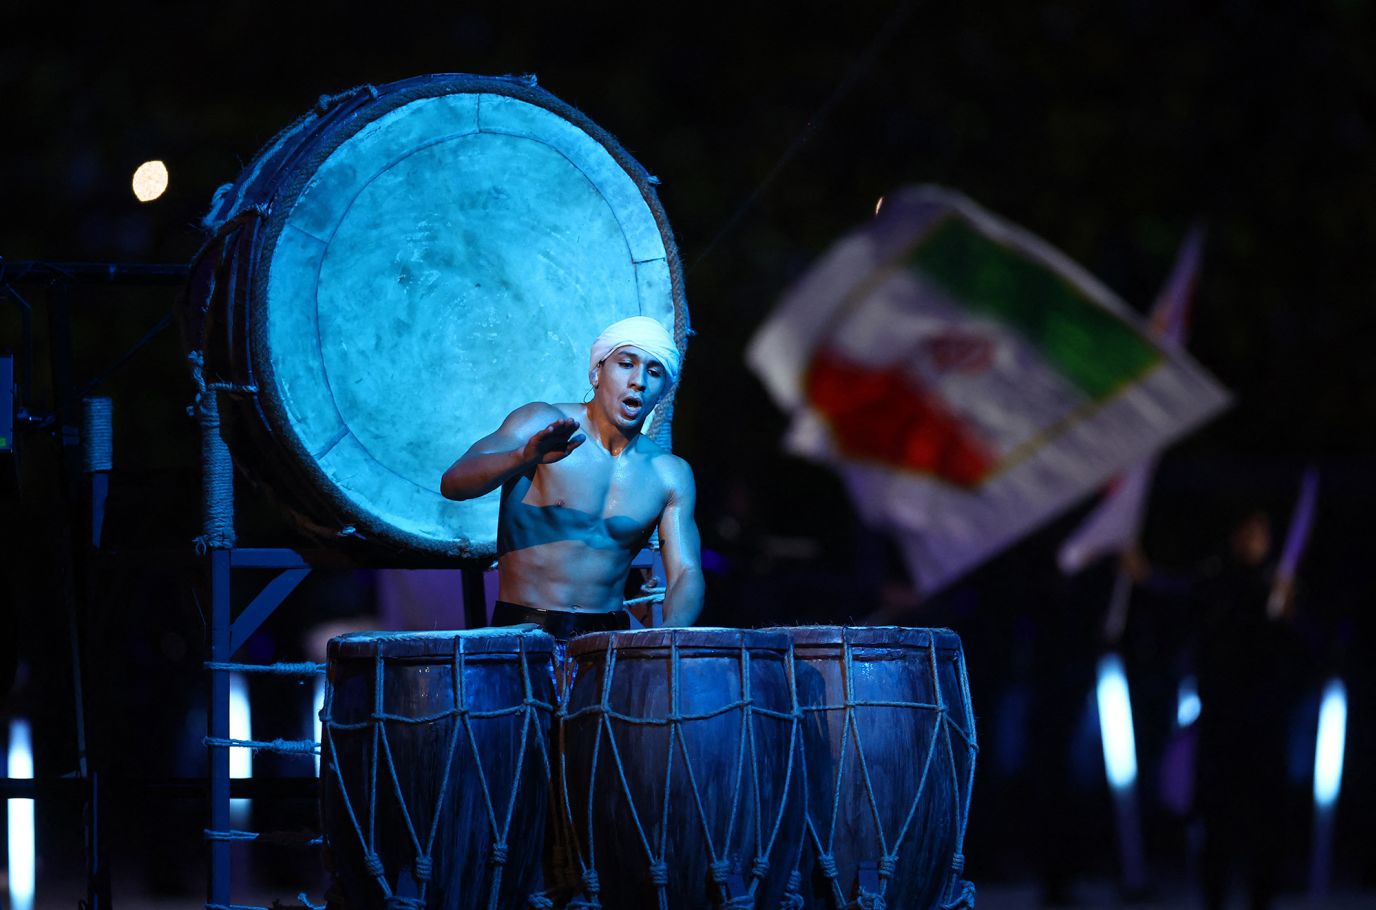 A performer plays drums during the opening ceremony.